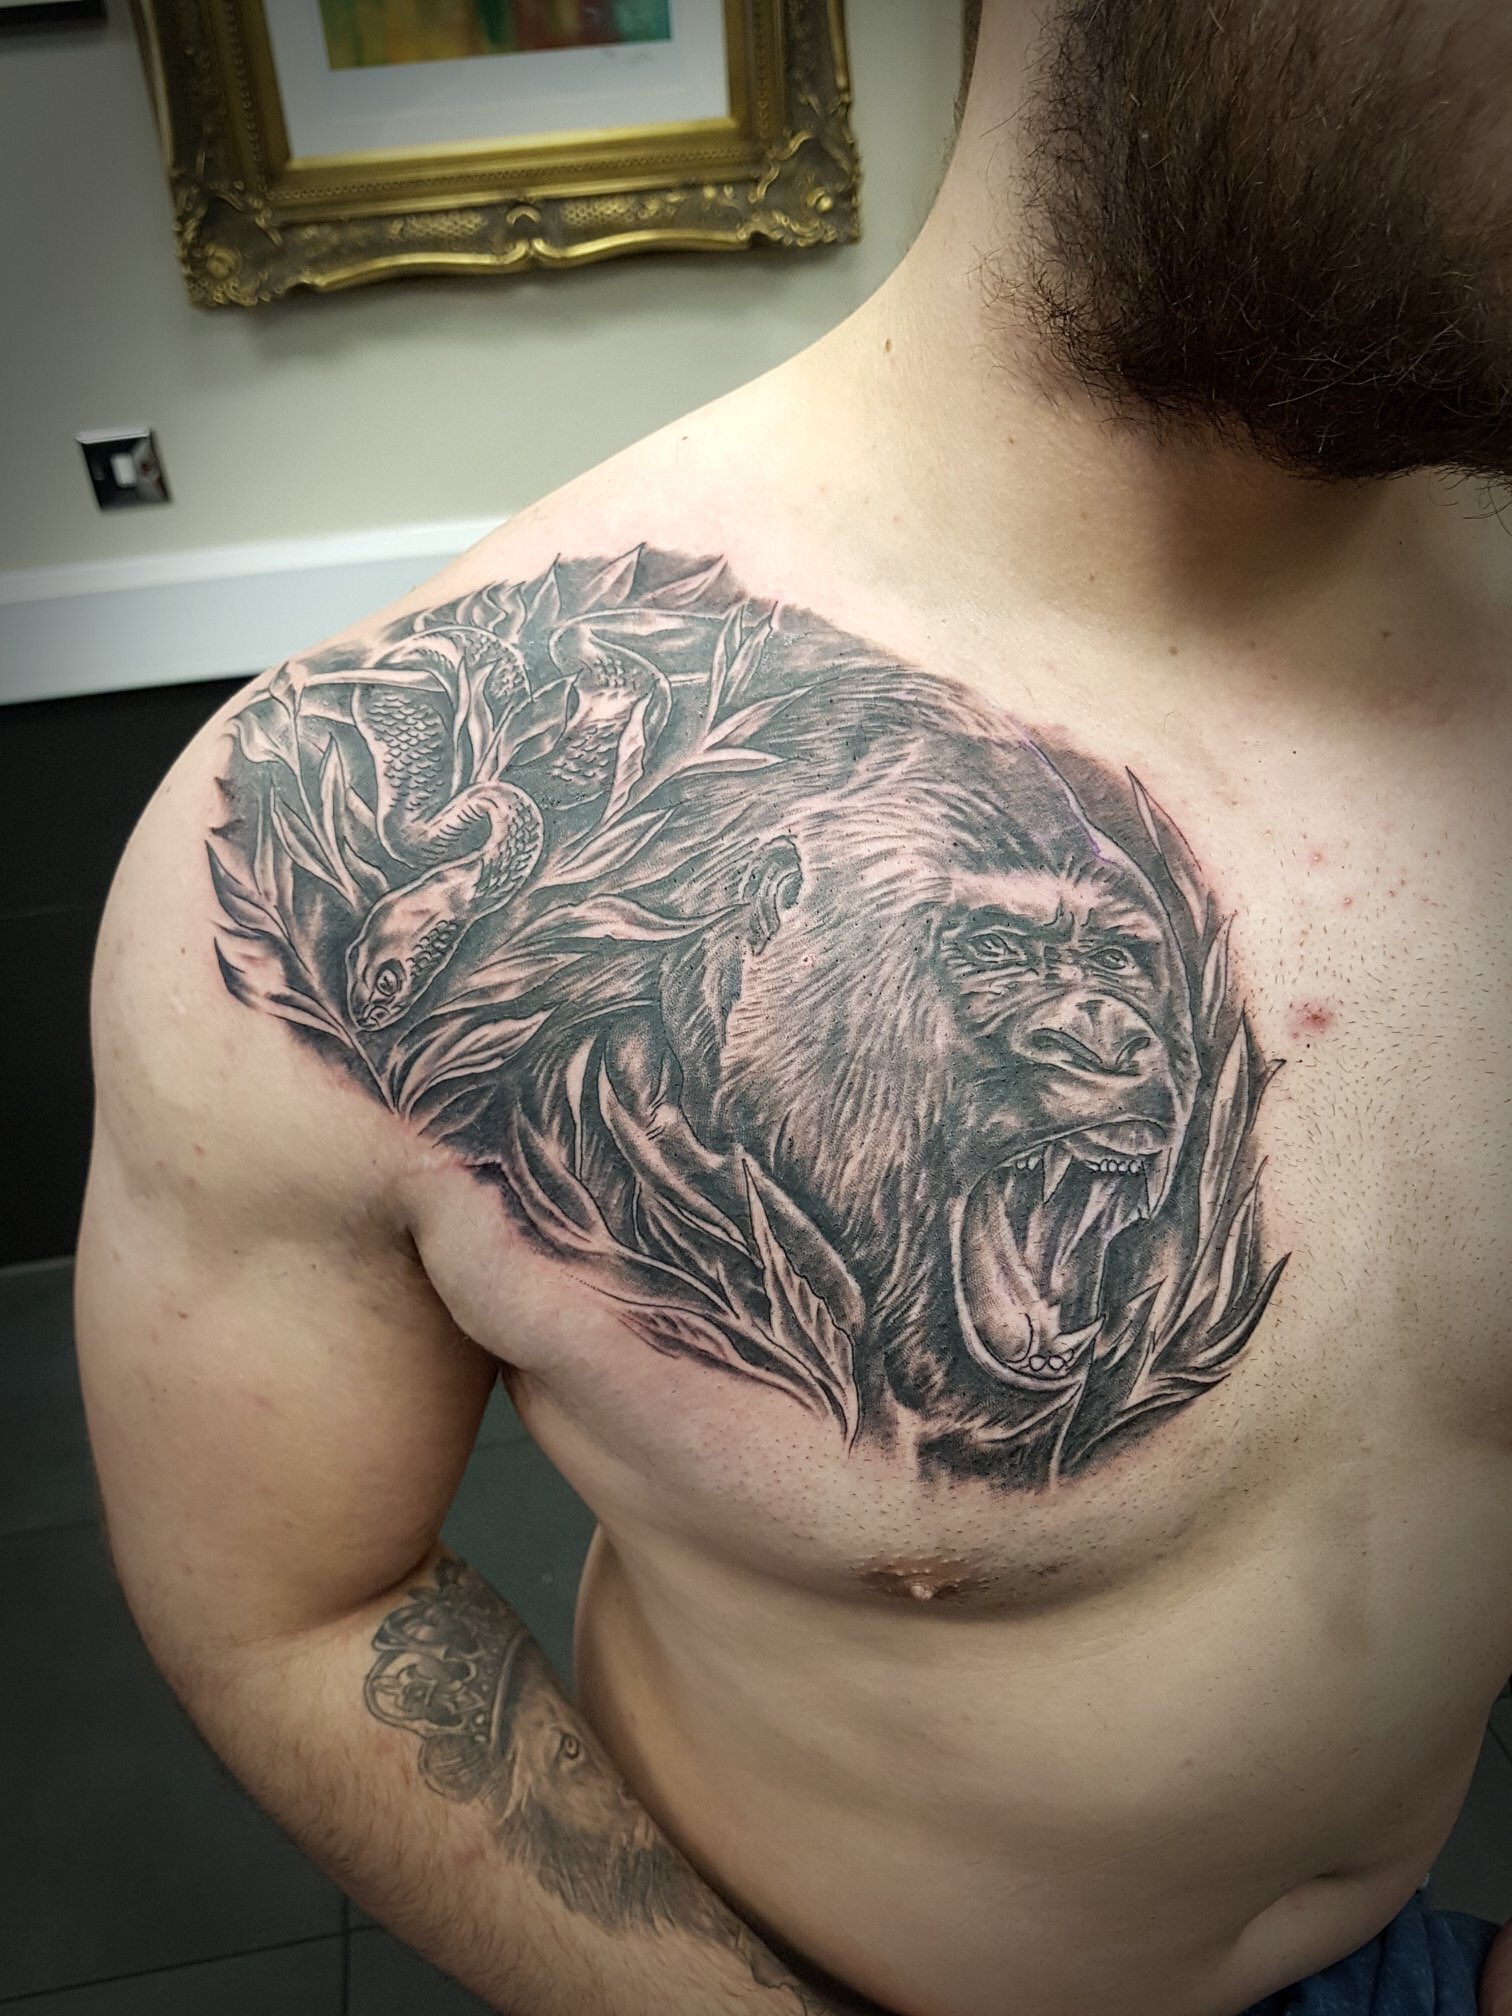 101 Amazing Gorilla Tattoos You Have Never Seen Before  Gorilla tattoo  Tattoos Tattoo you